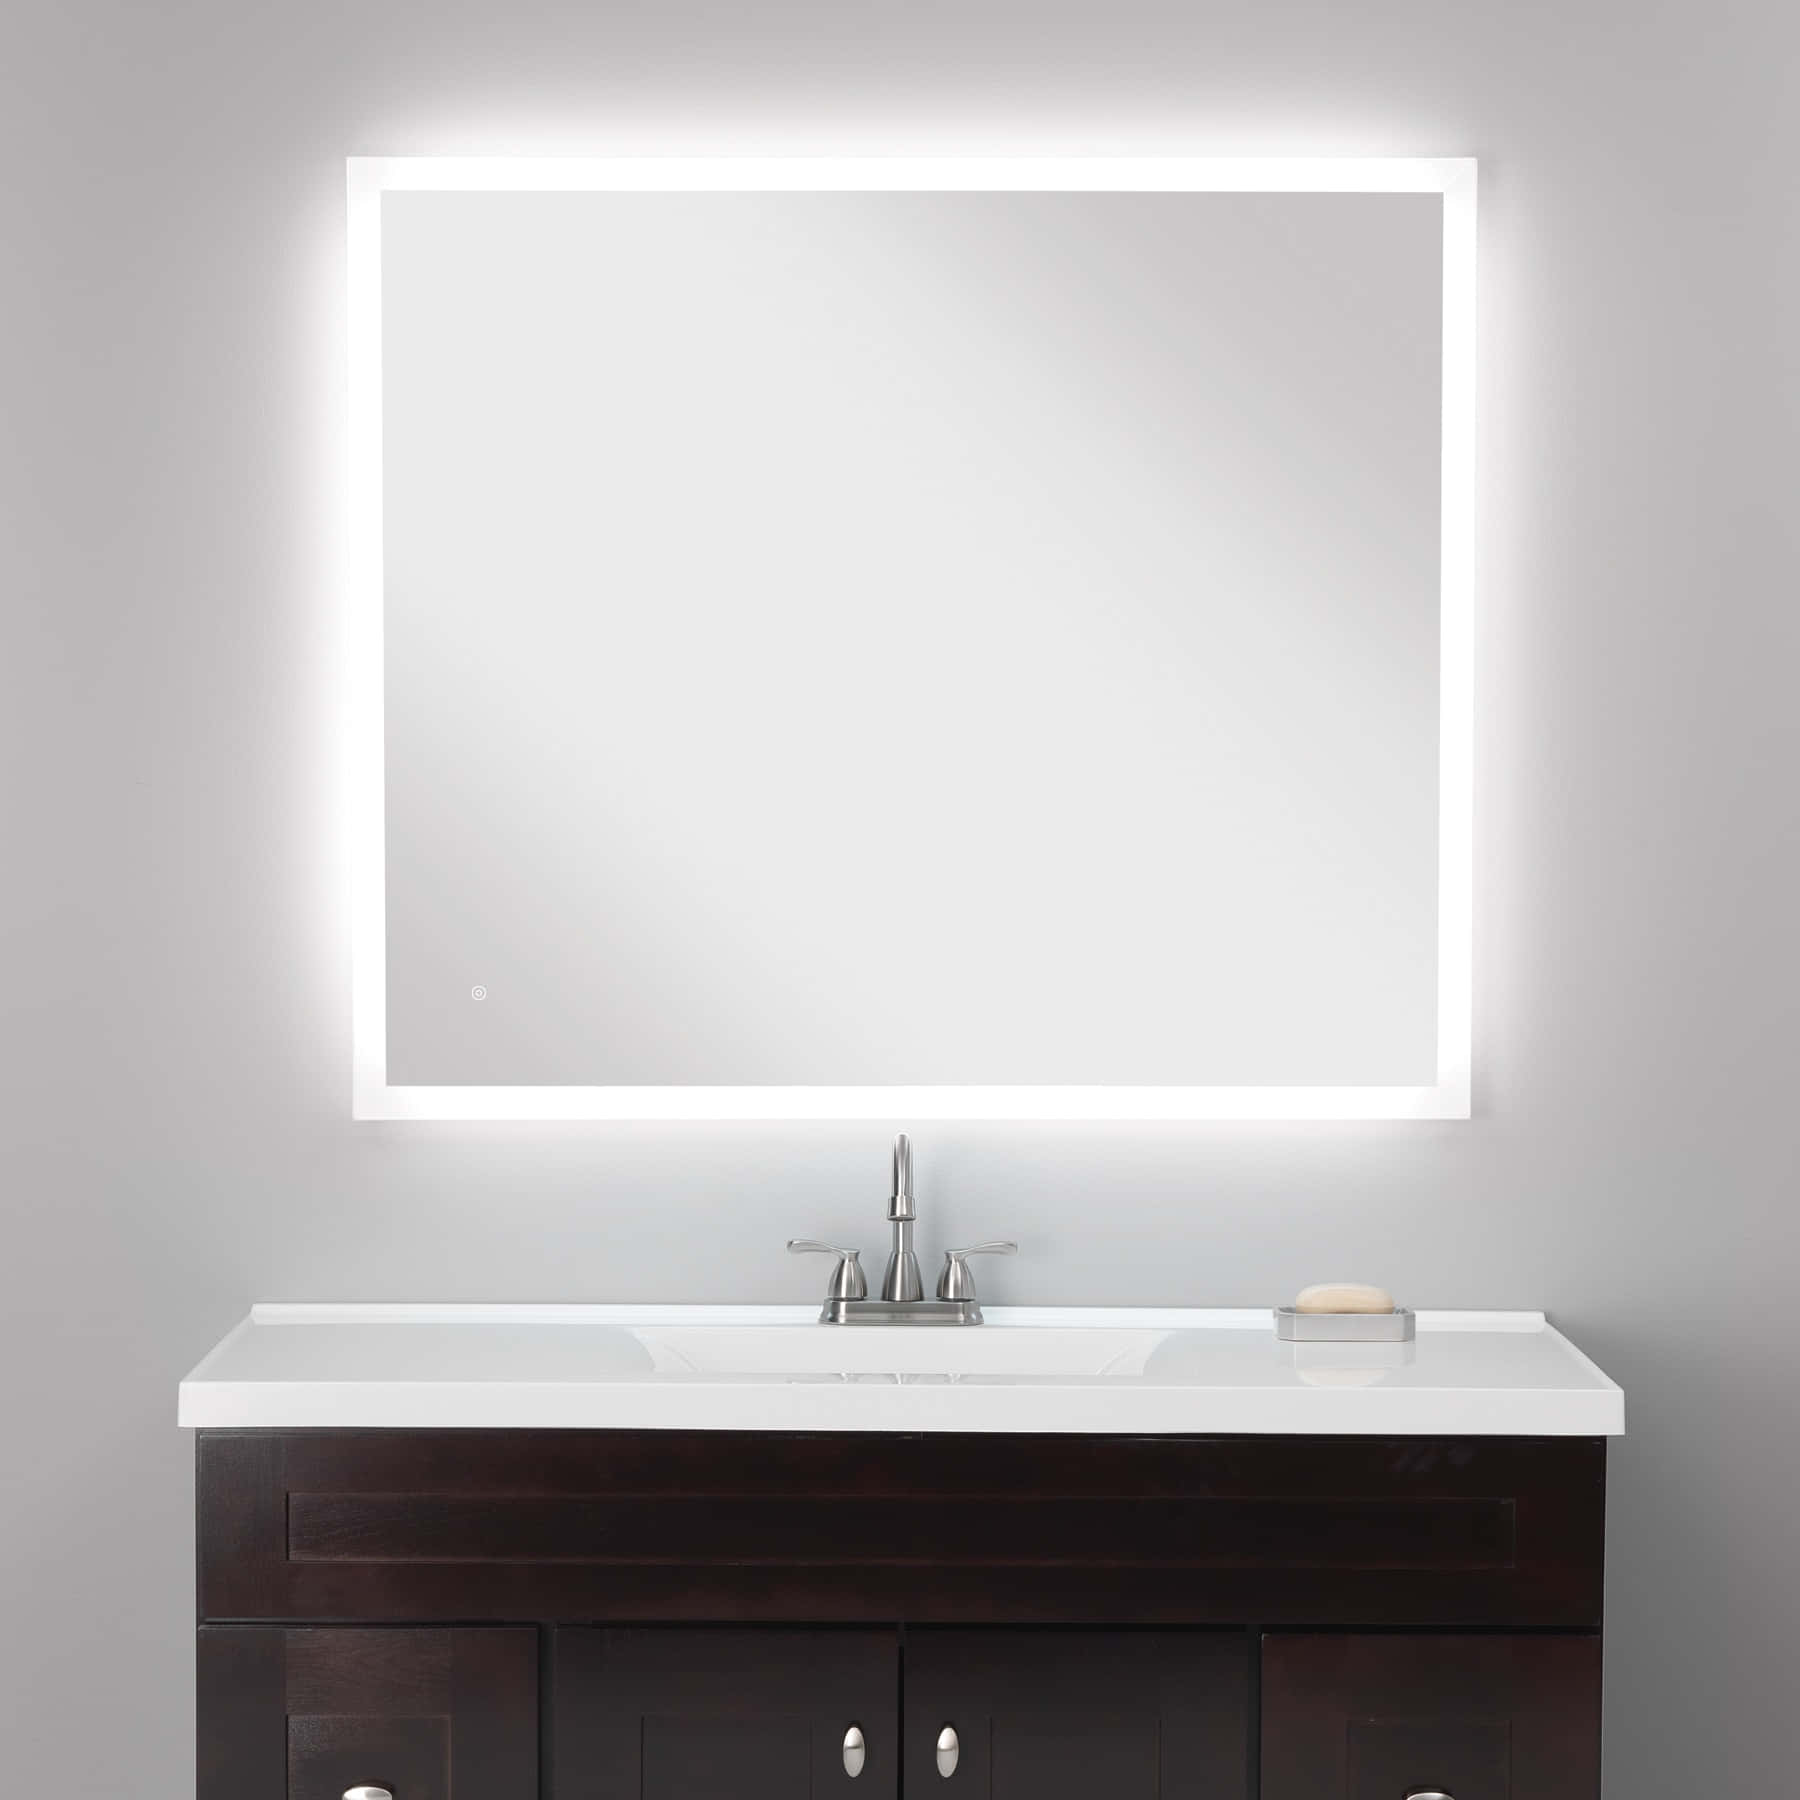 A Bathroom Vanity With A Mirror Above It